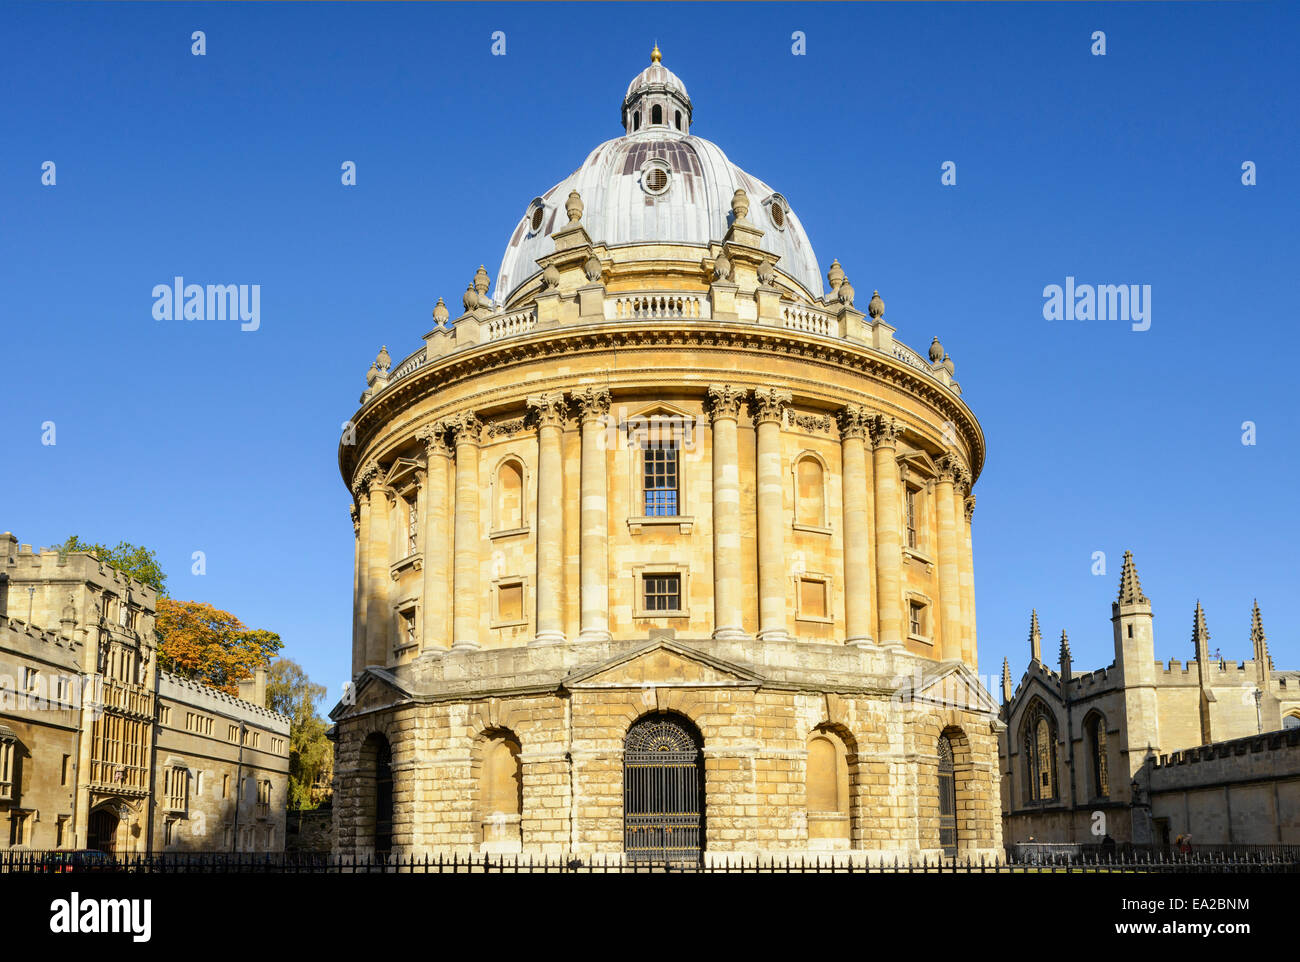 Radcliffe Camera Radcliffe Square Oxford University Angleterre UK Banque D'Images